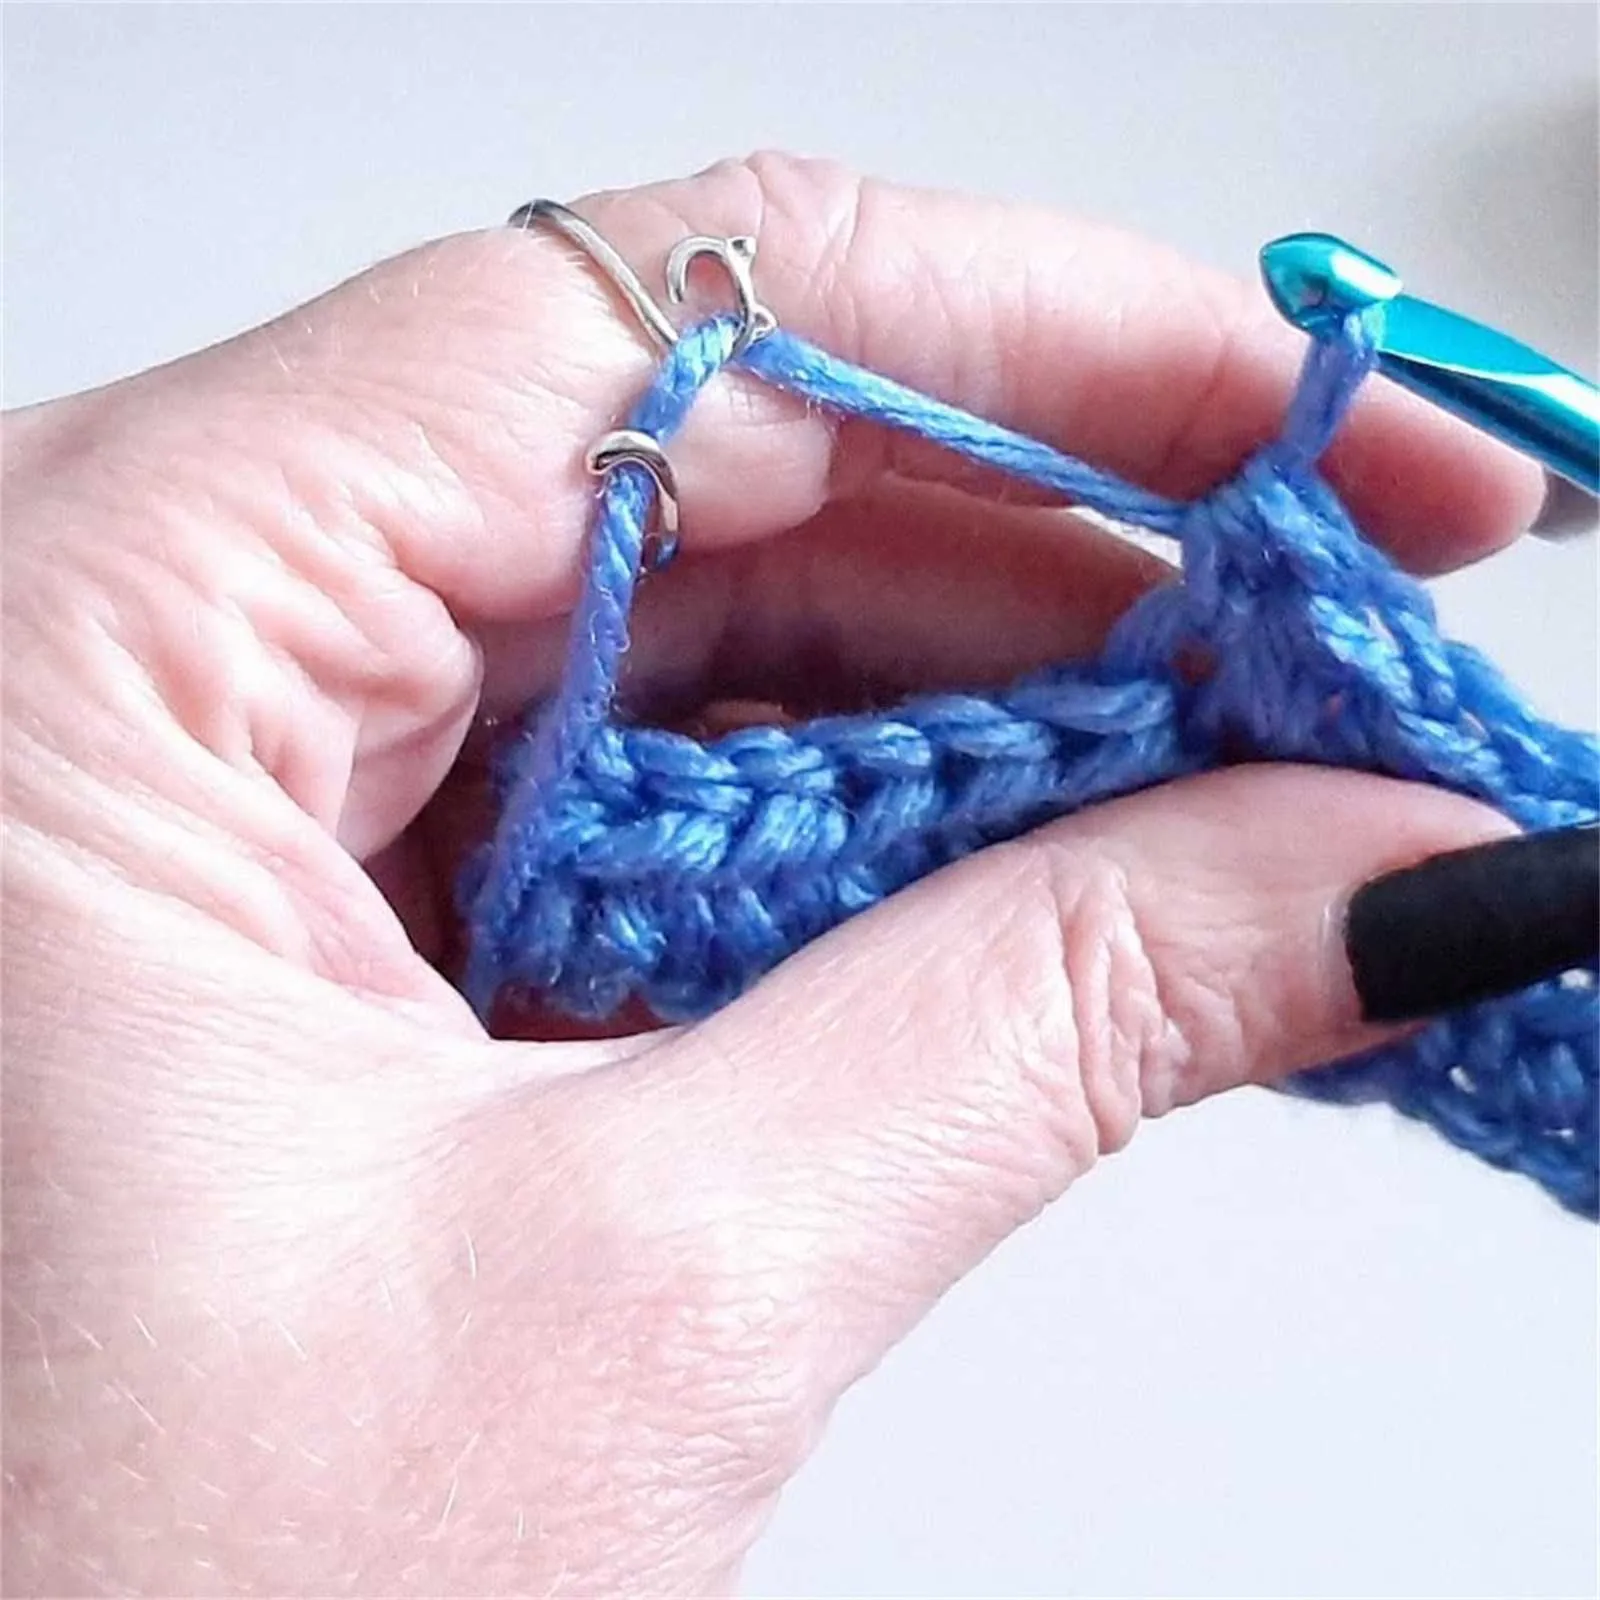 Adjustable Yarn Crochet Ring Protect With Kitty Ears Perfect Finger  Knitting Gift For Beginners From Dhgatemtej, $17.66